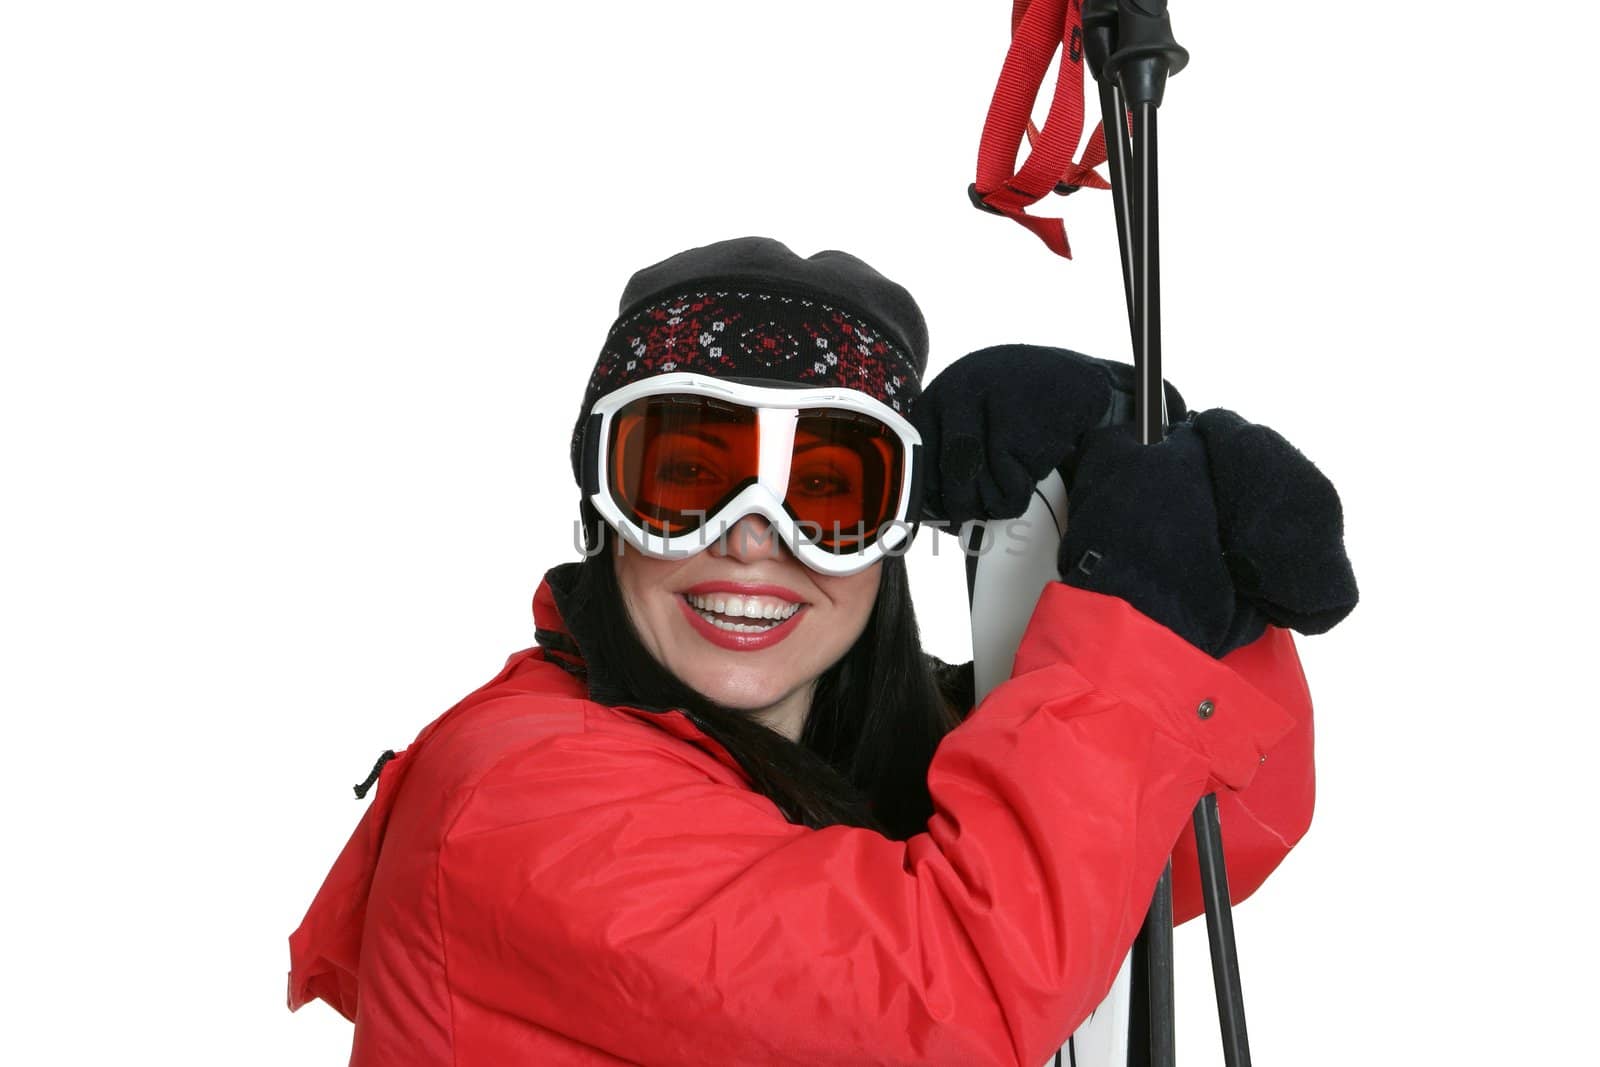 Female skier wearing warm red parka, beanie and goggles is leaning on skis and smiling.